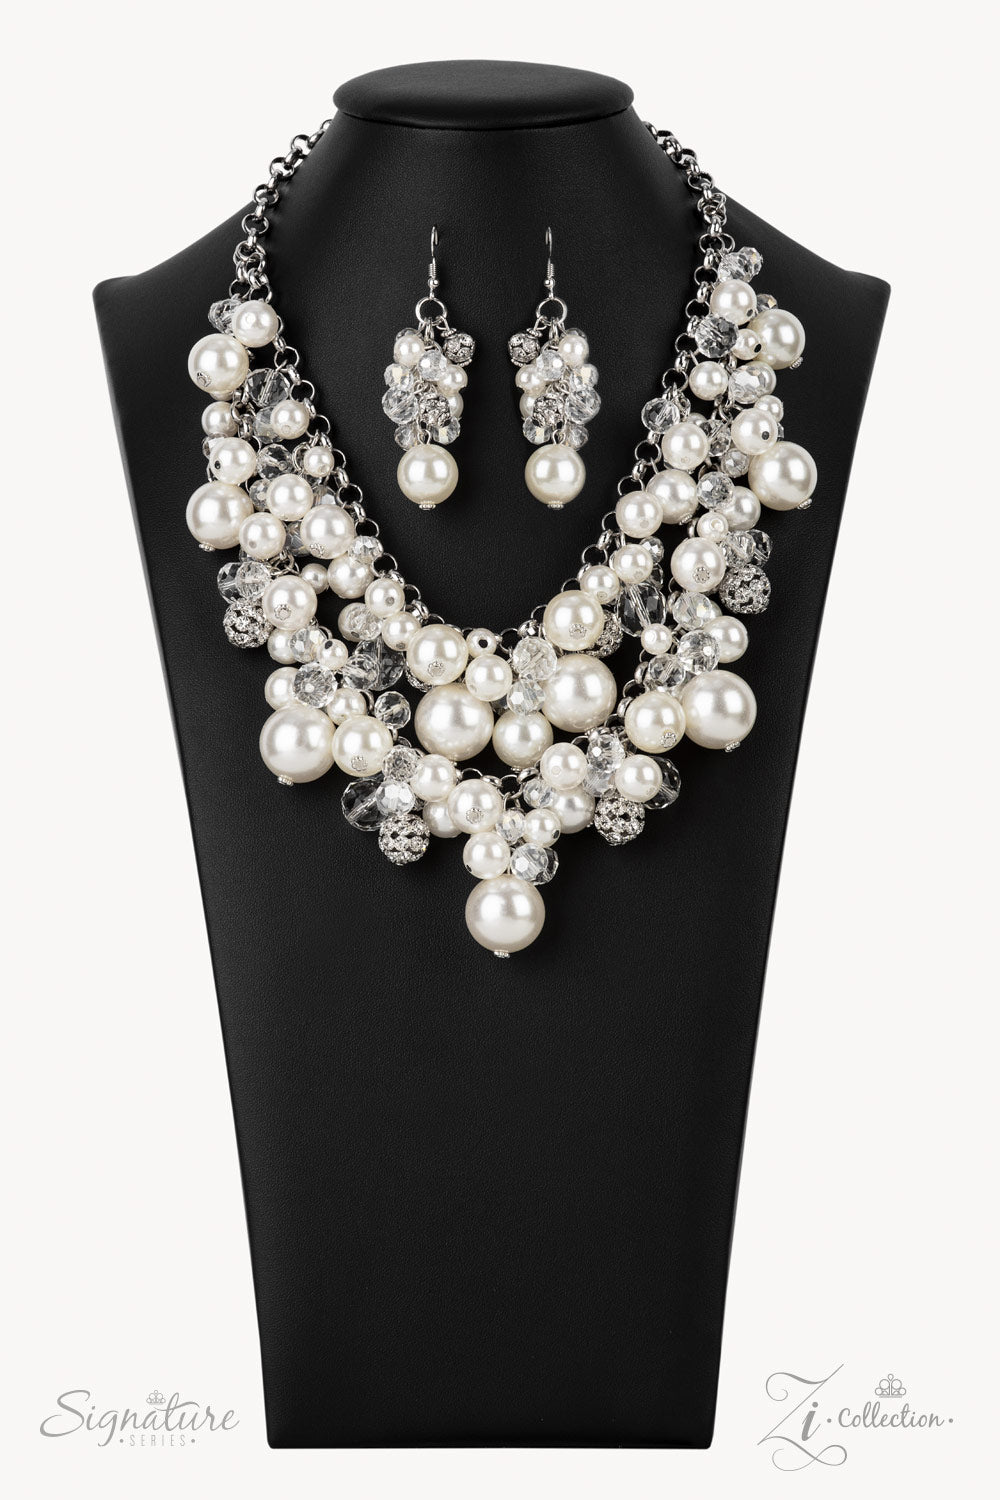 An elegantly effervescent collection of oversized pearls, glassy crystal-like beads, and white rhinestone studded silver ornaments effortlessly clusters along two bold silver chains below the collar. The bubbly bunched accents glamorously gather into a brilliantly boisterous fringe for an uproarious uptown fashion. Features an adjustable clasp closure.  All Paparazzi Accessories are lead free and nickel free!